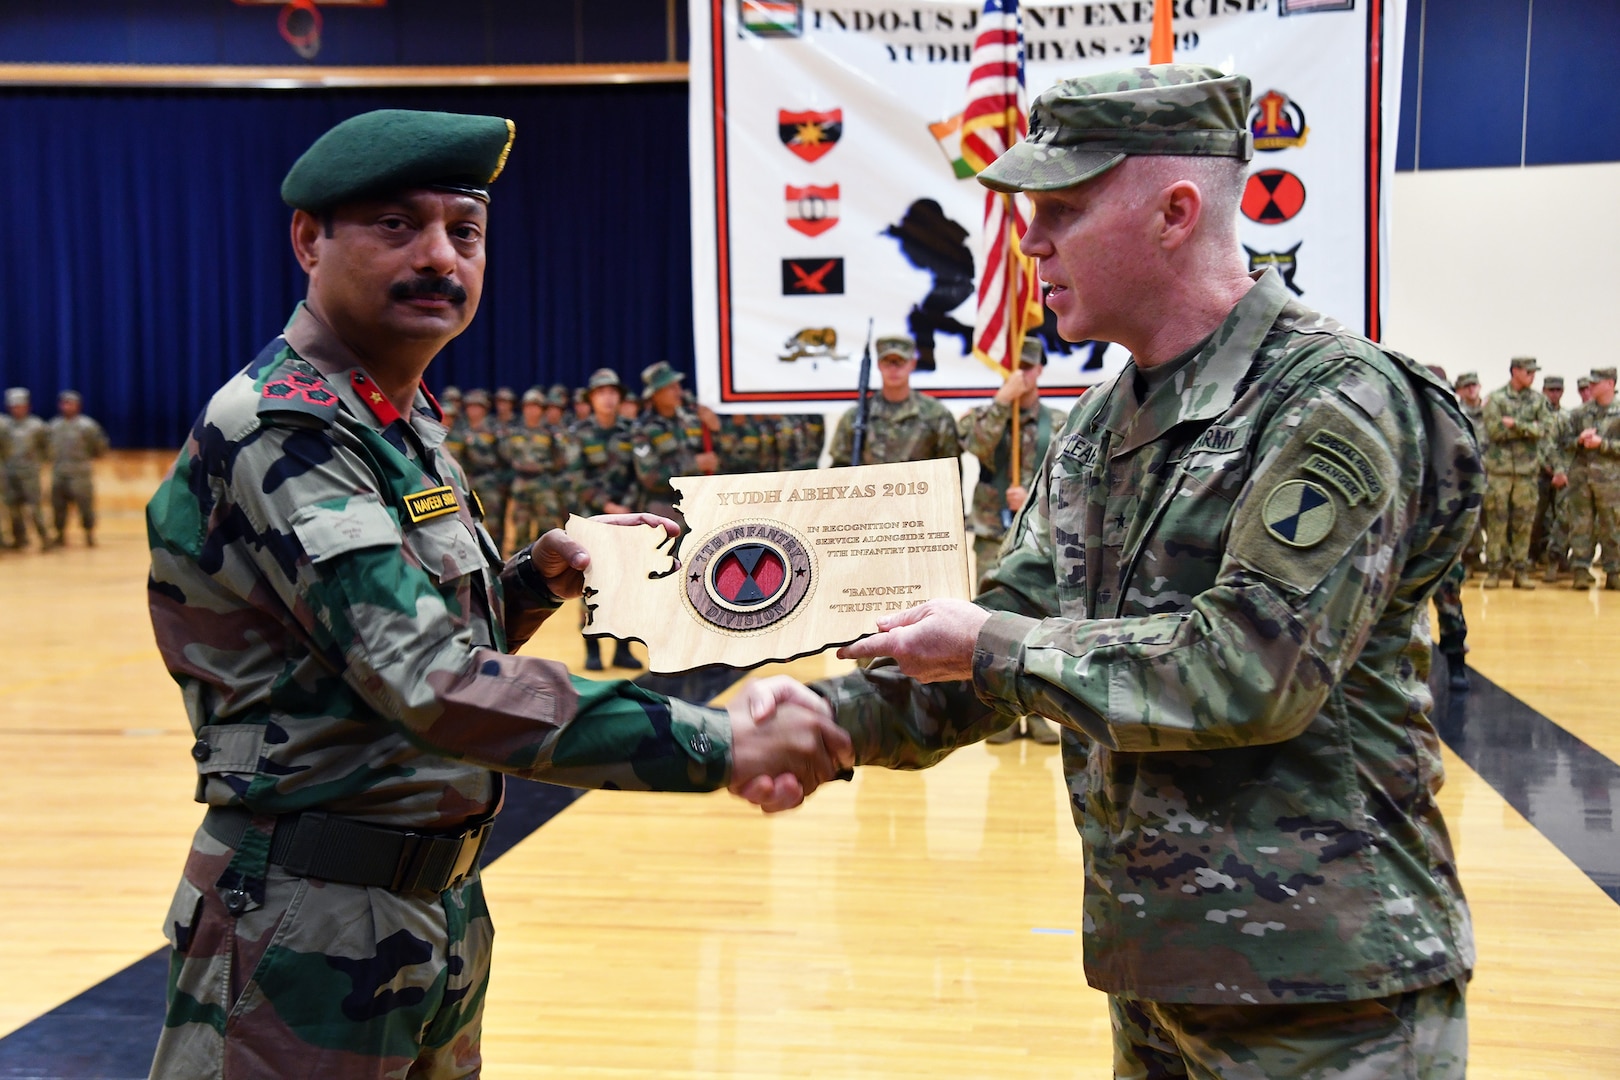 U.S. and Indian Armies Complete Yudh Abhyas 19